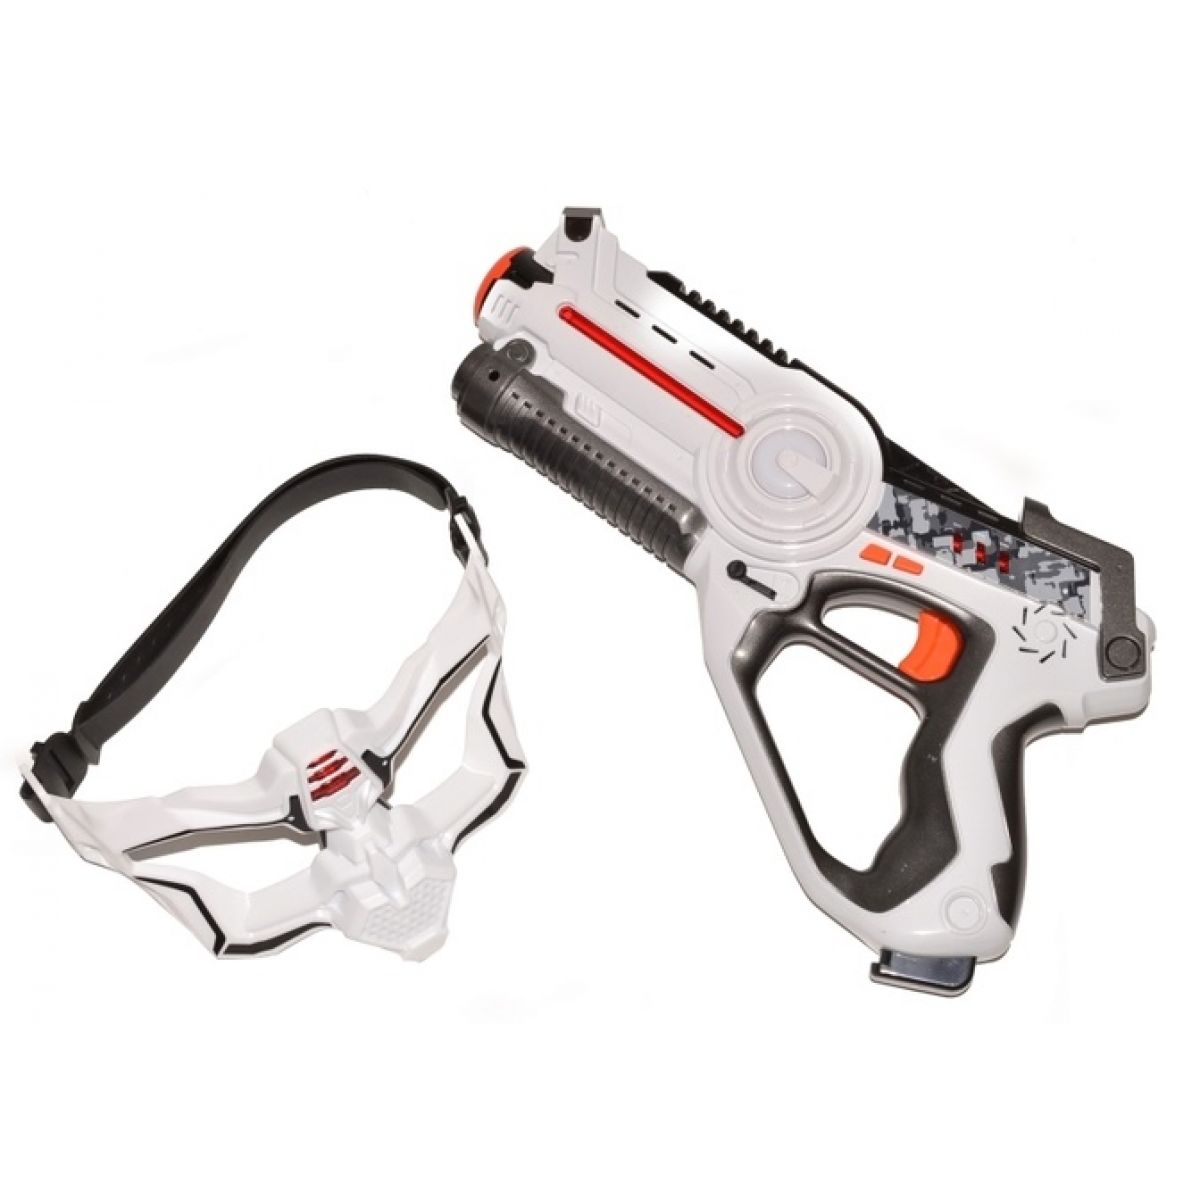 Wiky Territory Laser Game single set